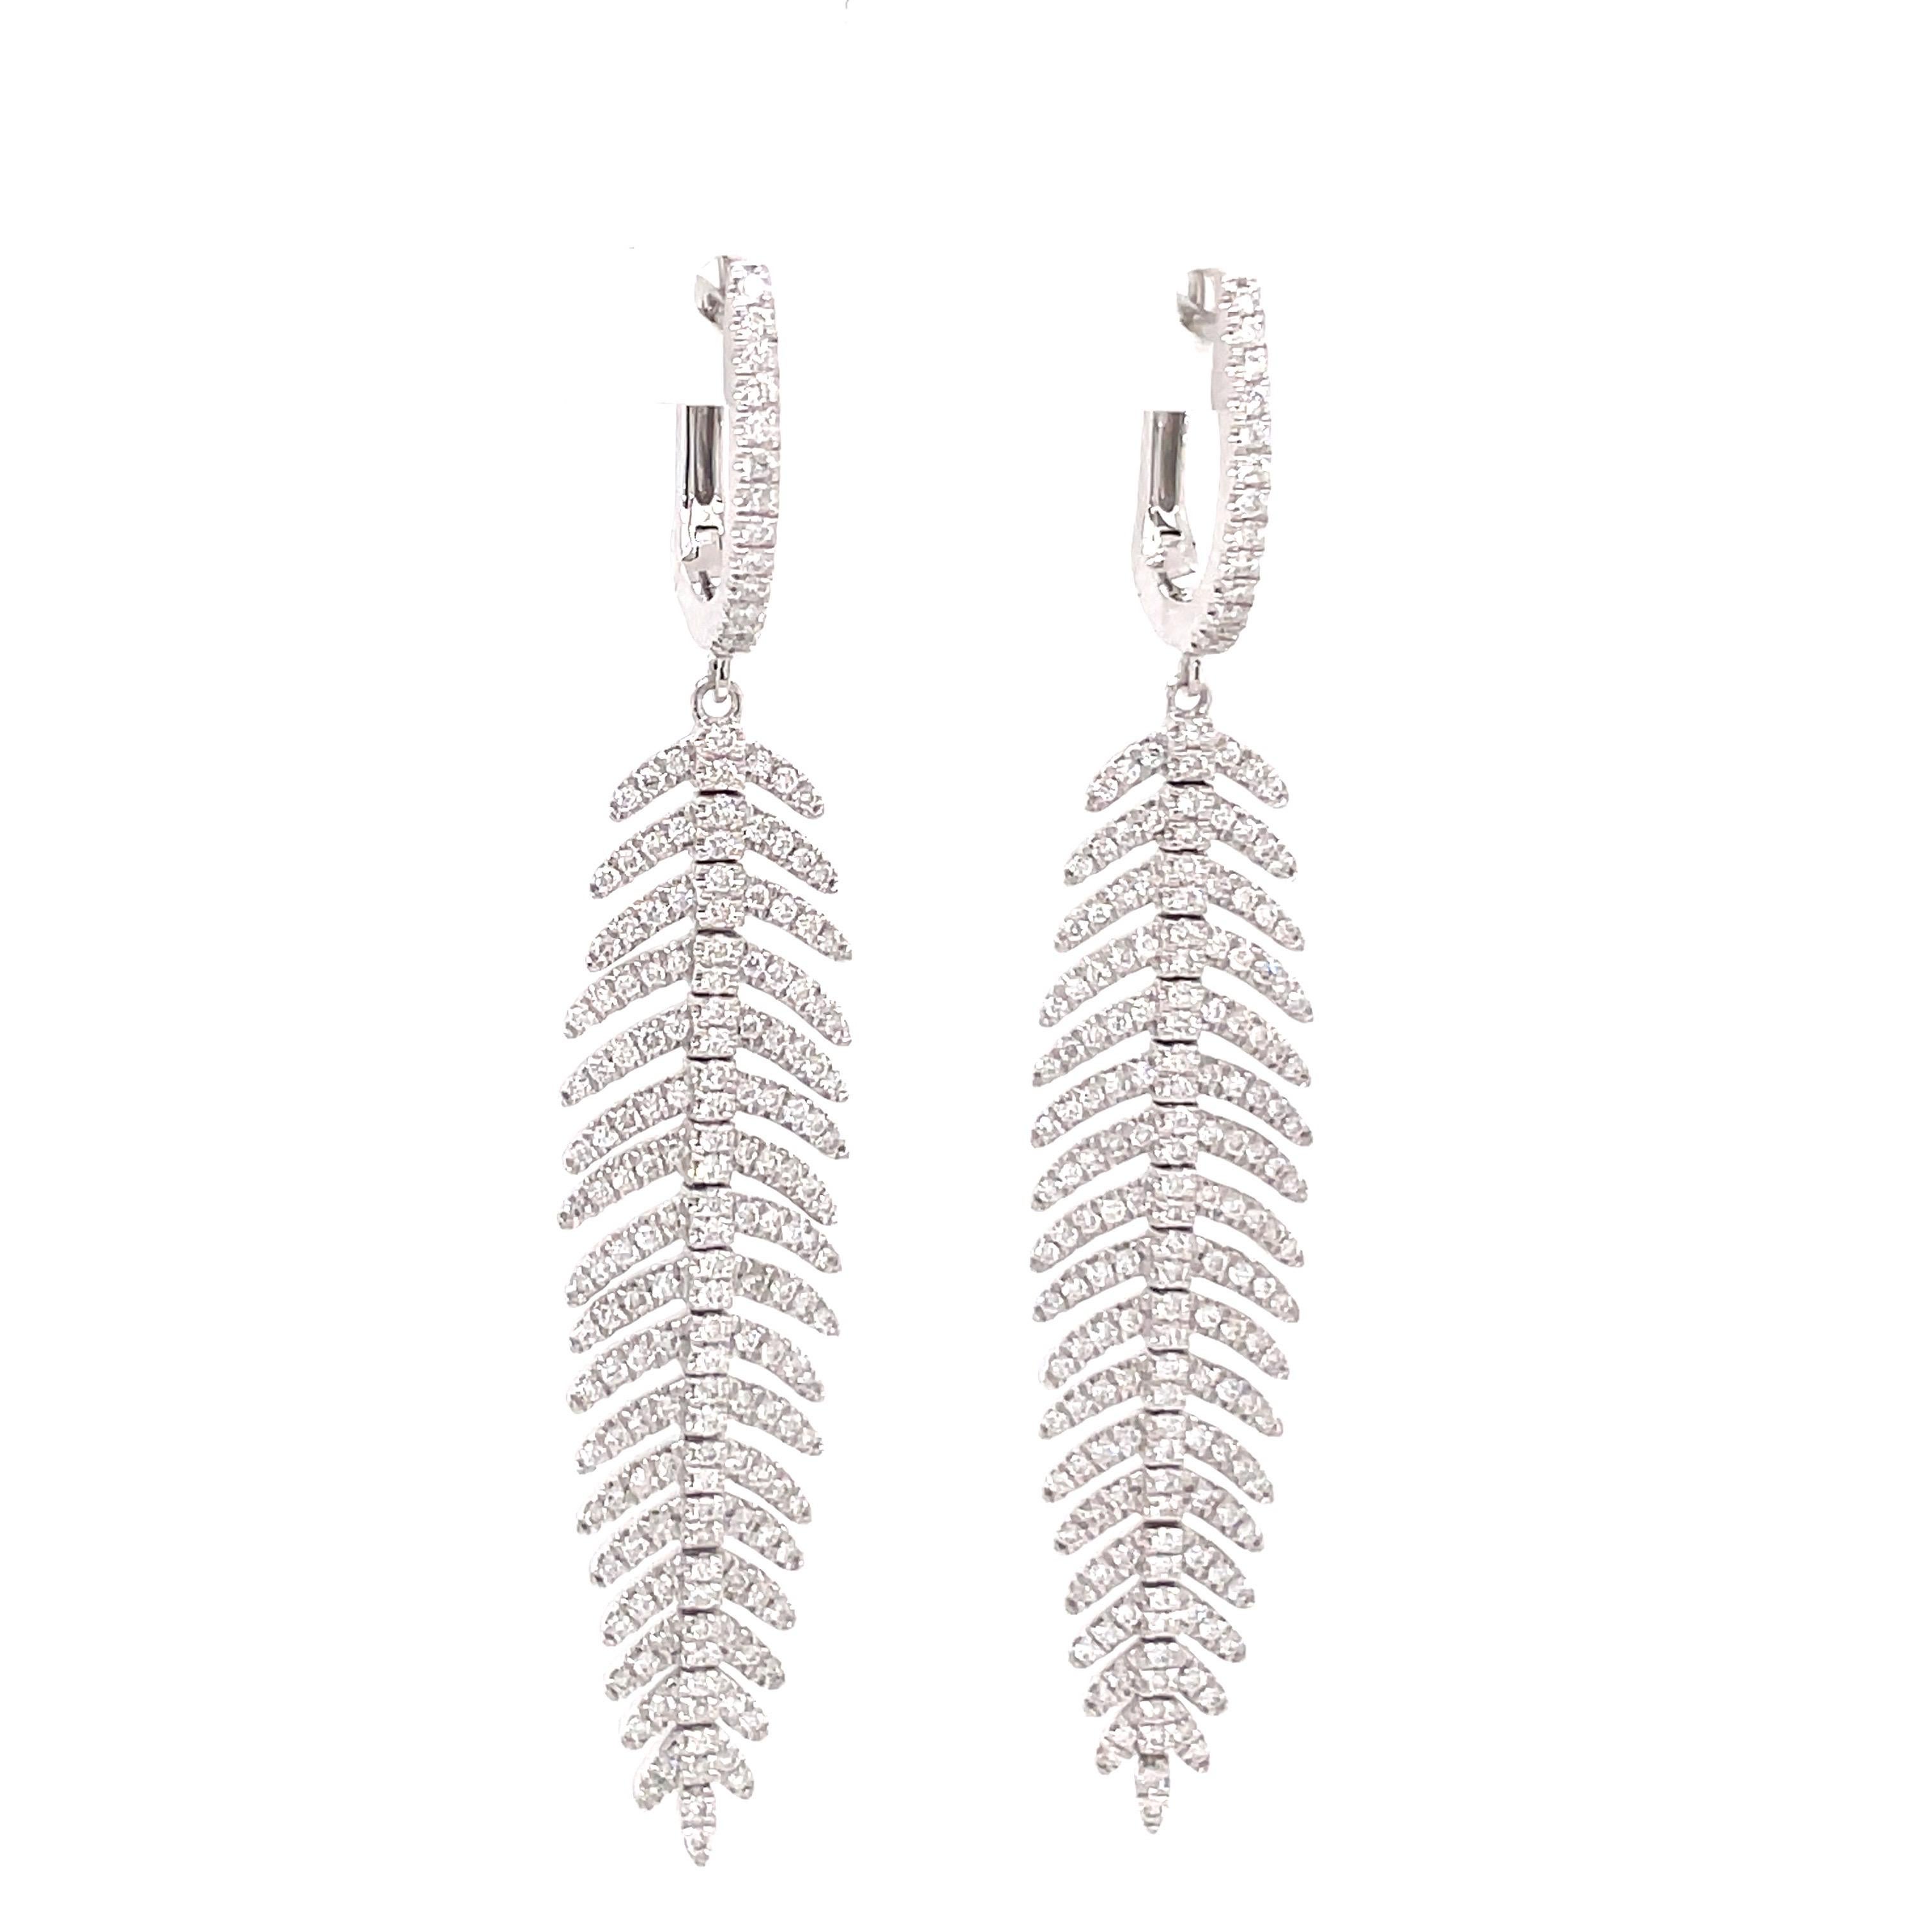 14 Karat White Gold drop earrings featuring 358 round brilliants in a feather motif weighing 1.28 carats.
Color G-H
Clarity SI

Available in yellow gold. 